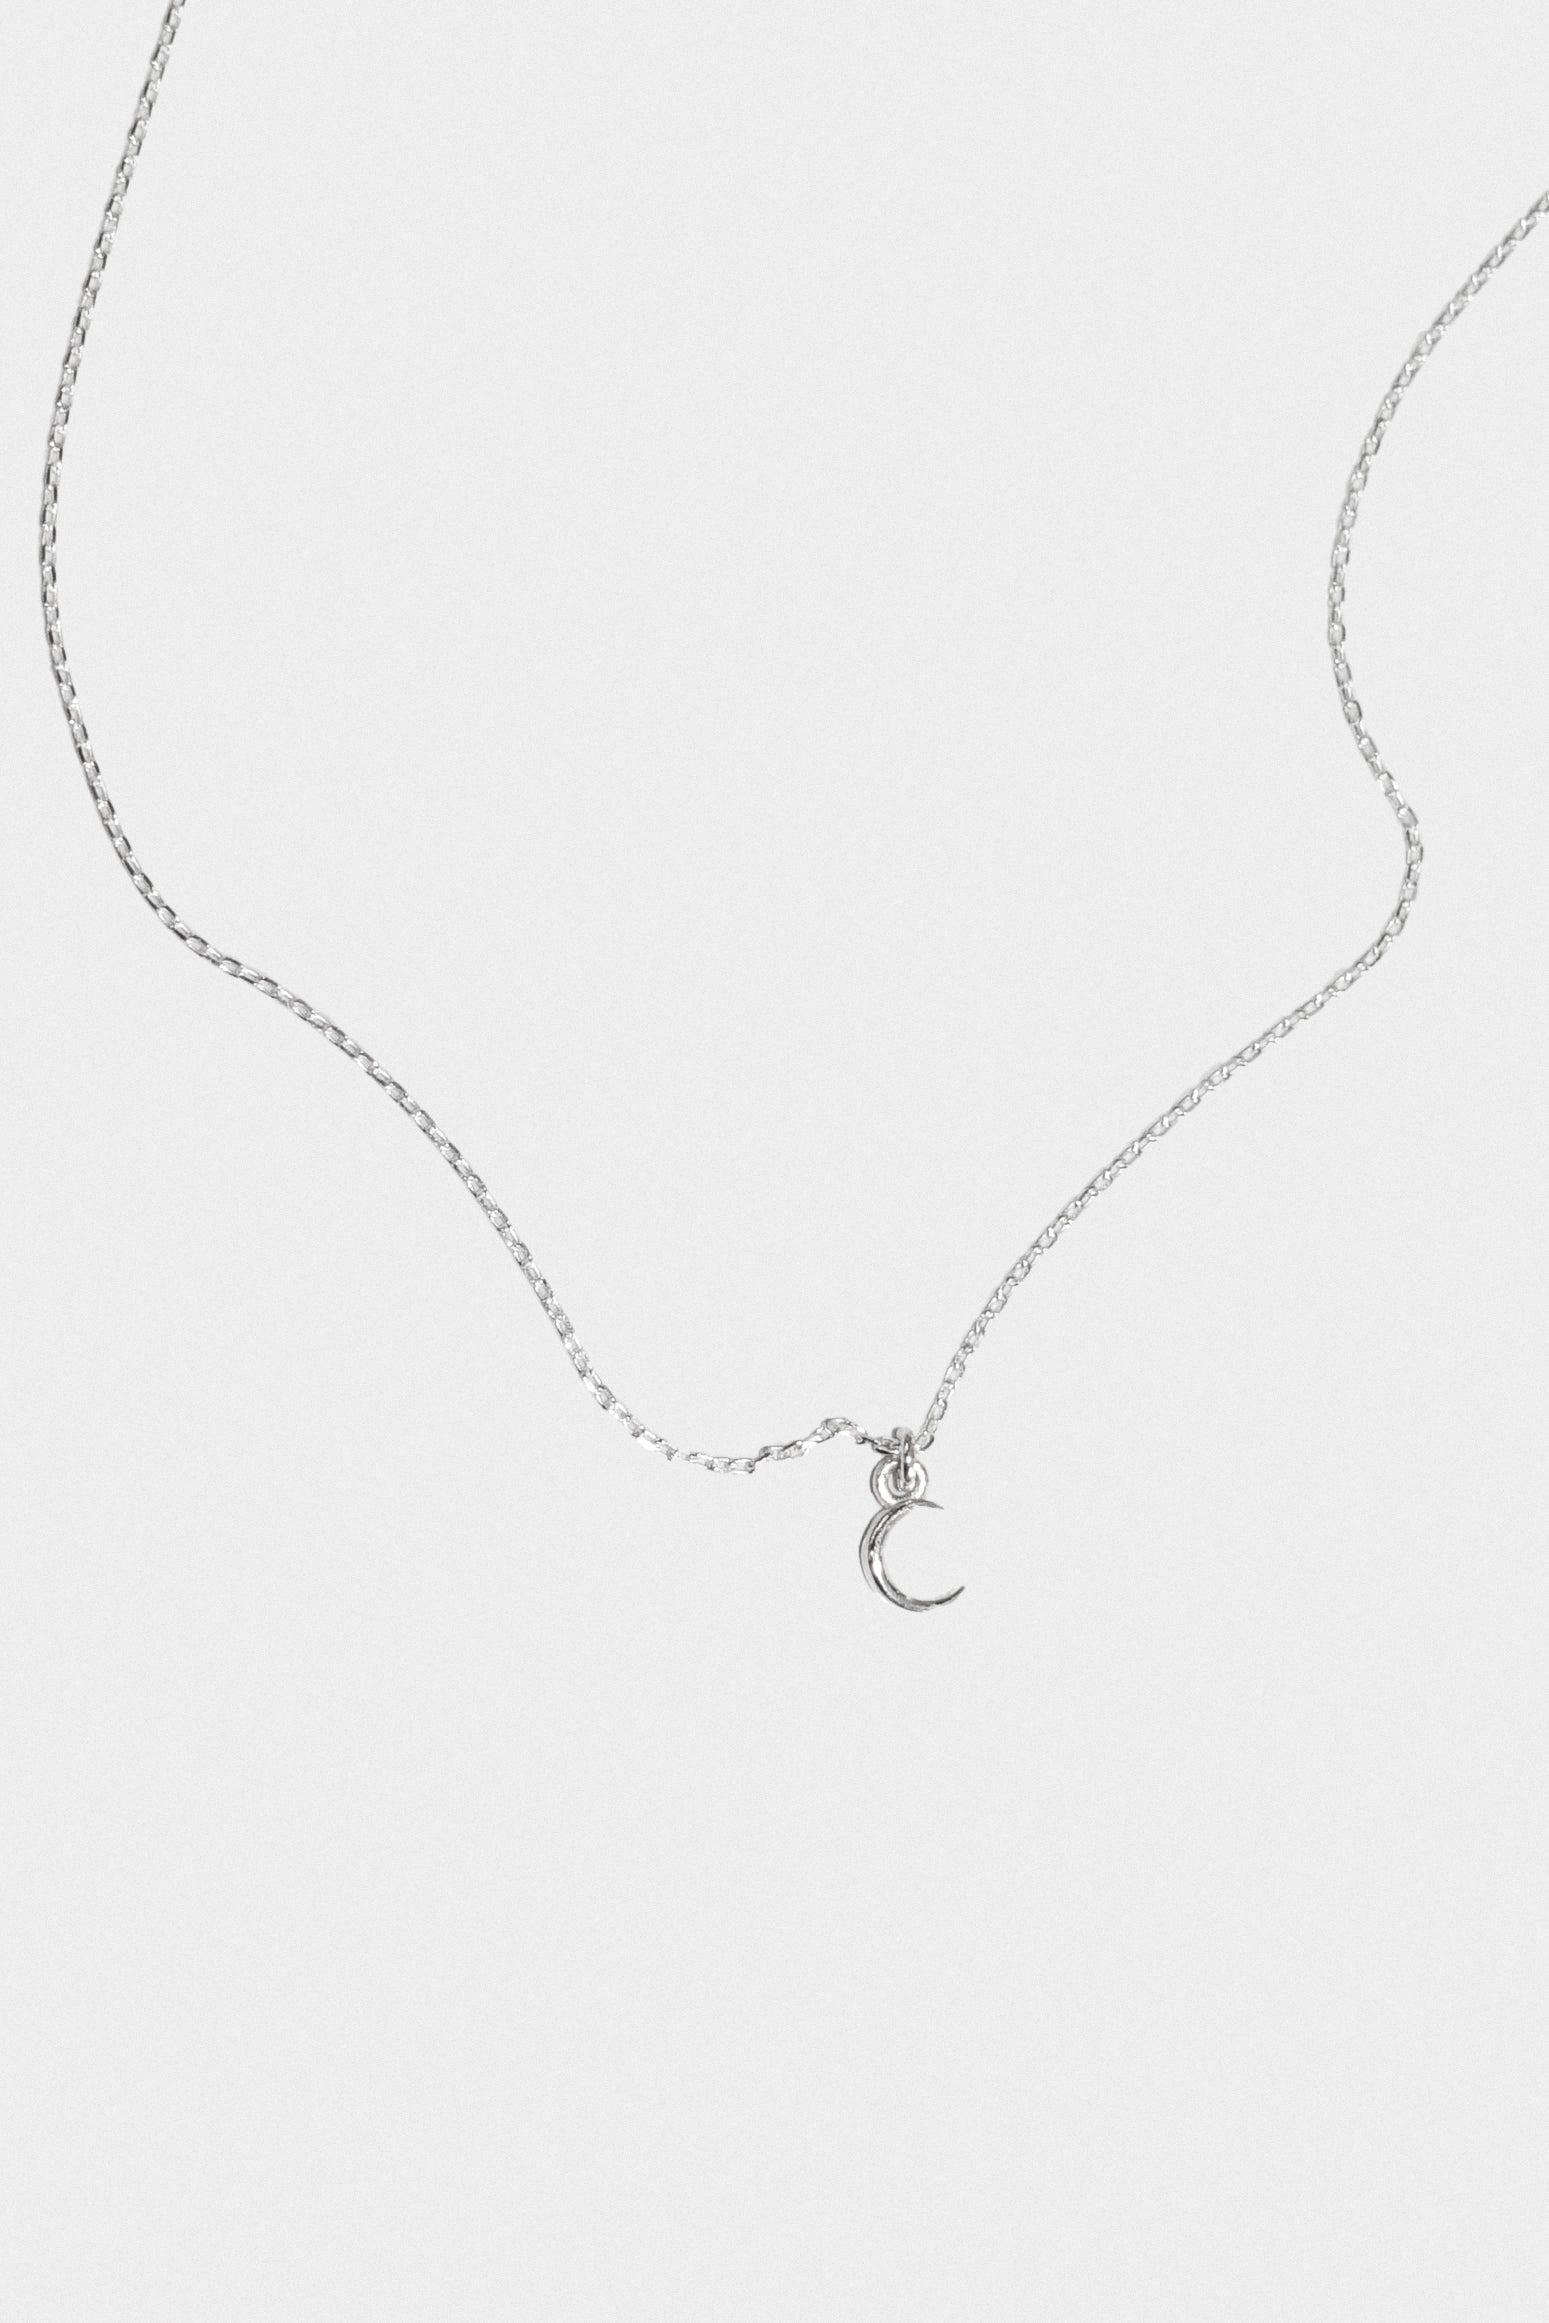 Itty Bitty Crescent Moon Pendant Necklace in Sterling Silver